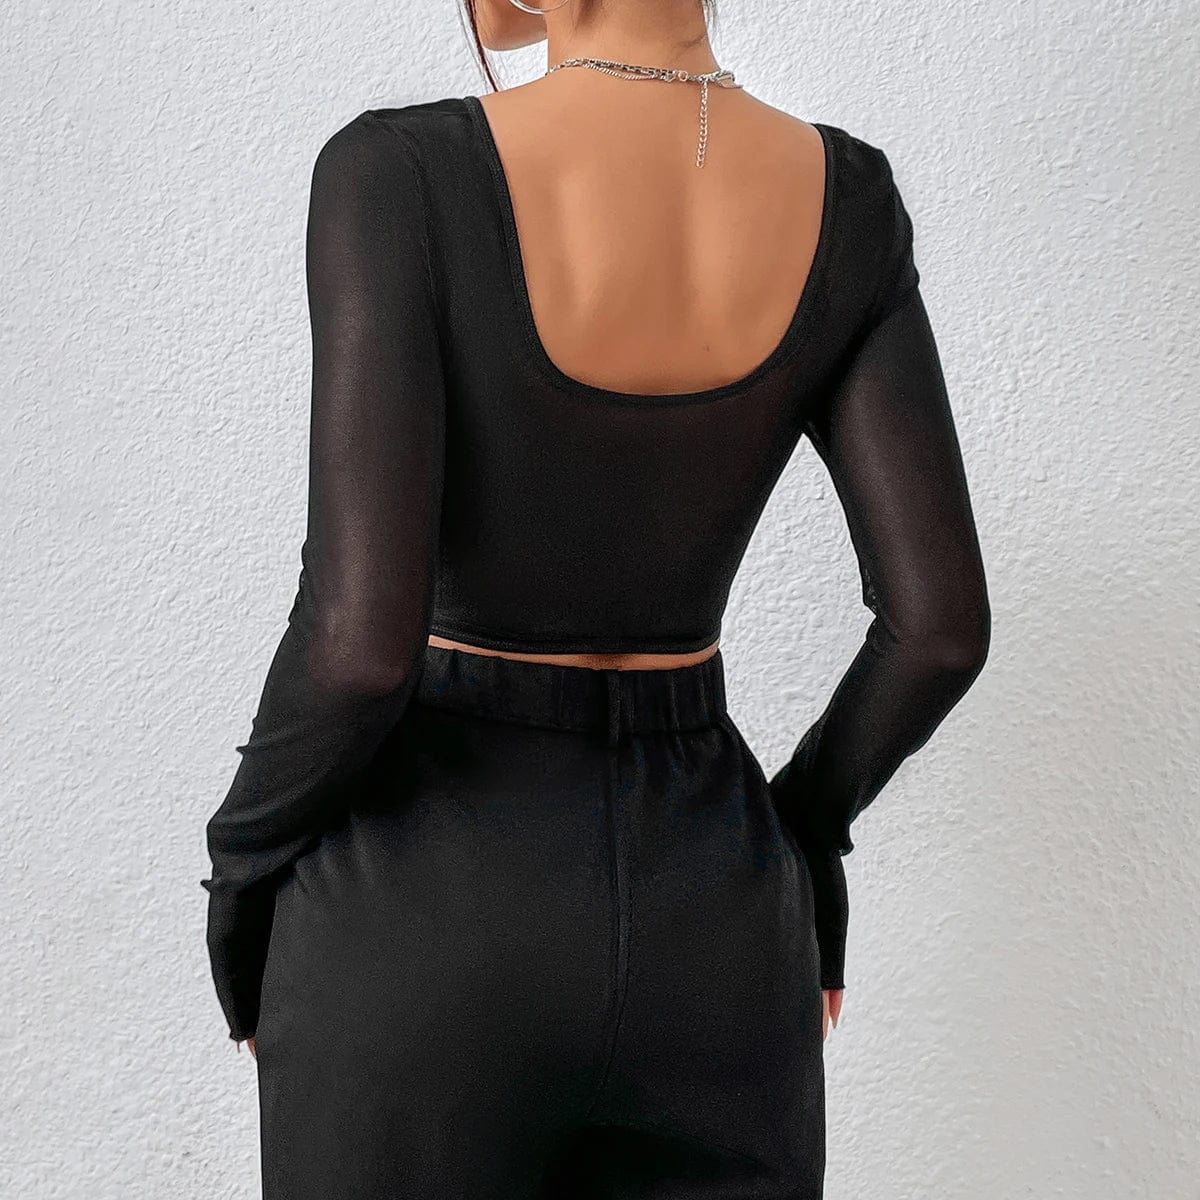 Vemina Selection of Autumn Chic Sexy V Neck Long Sleeve Mesh Crop Top, Women Black Lace Embroidery Hollow Out Slim Blouses